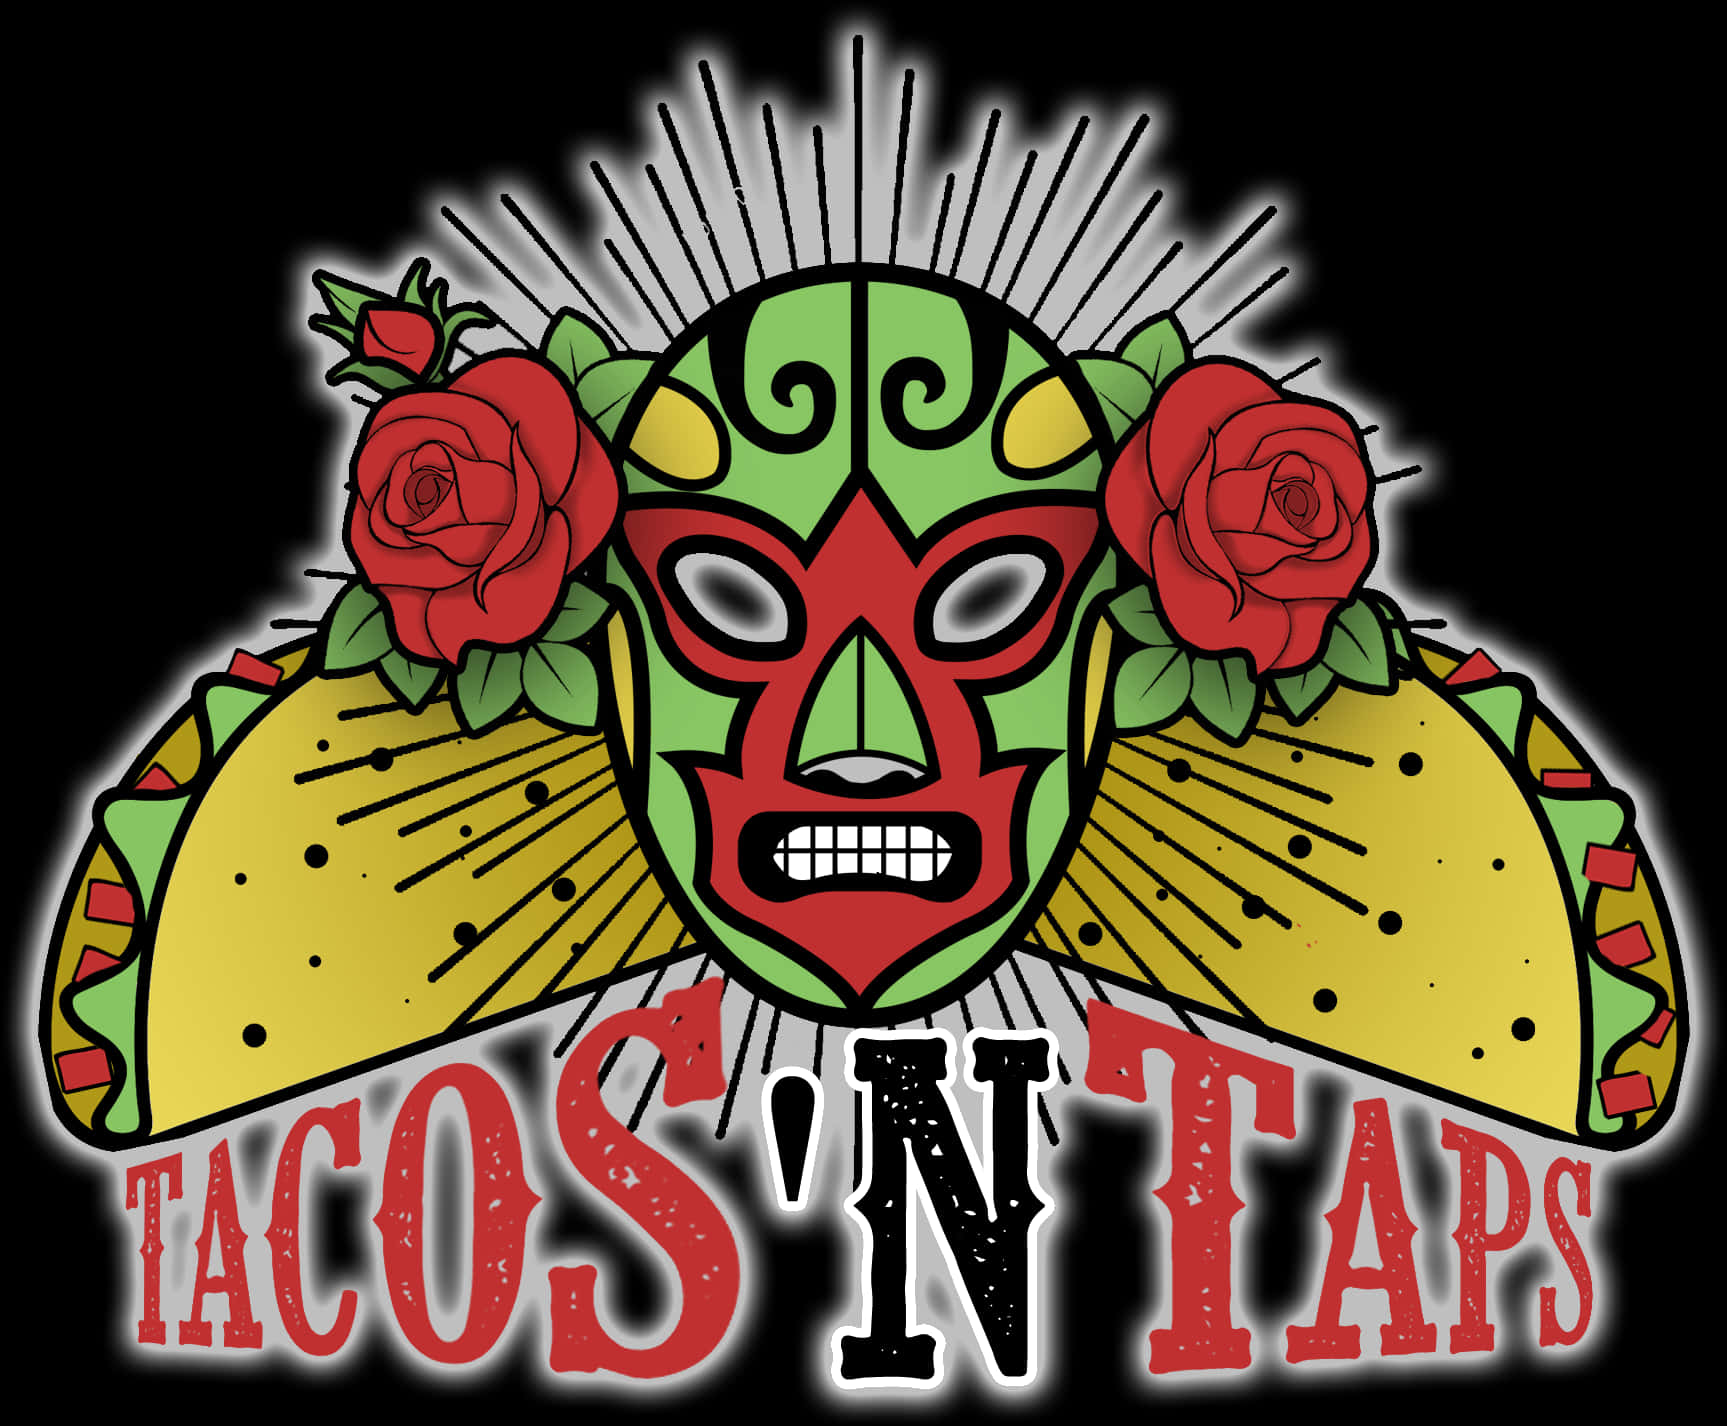 Tacos And Taps